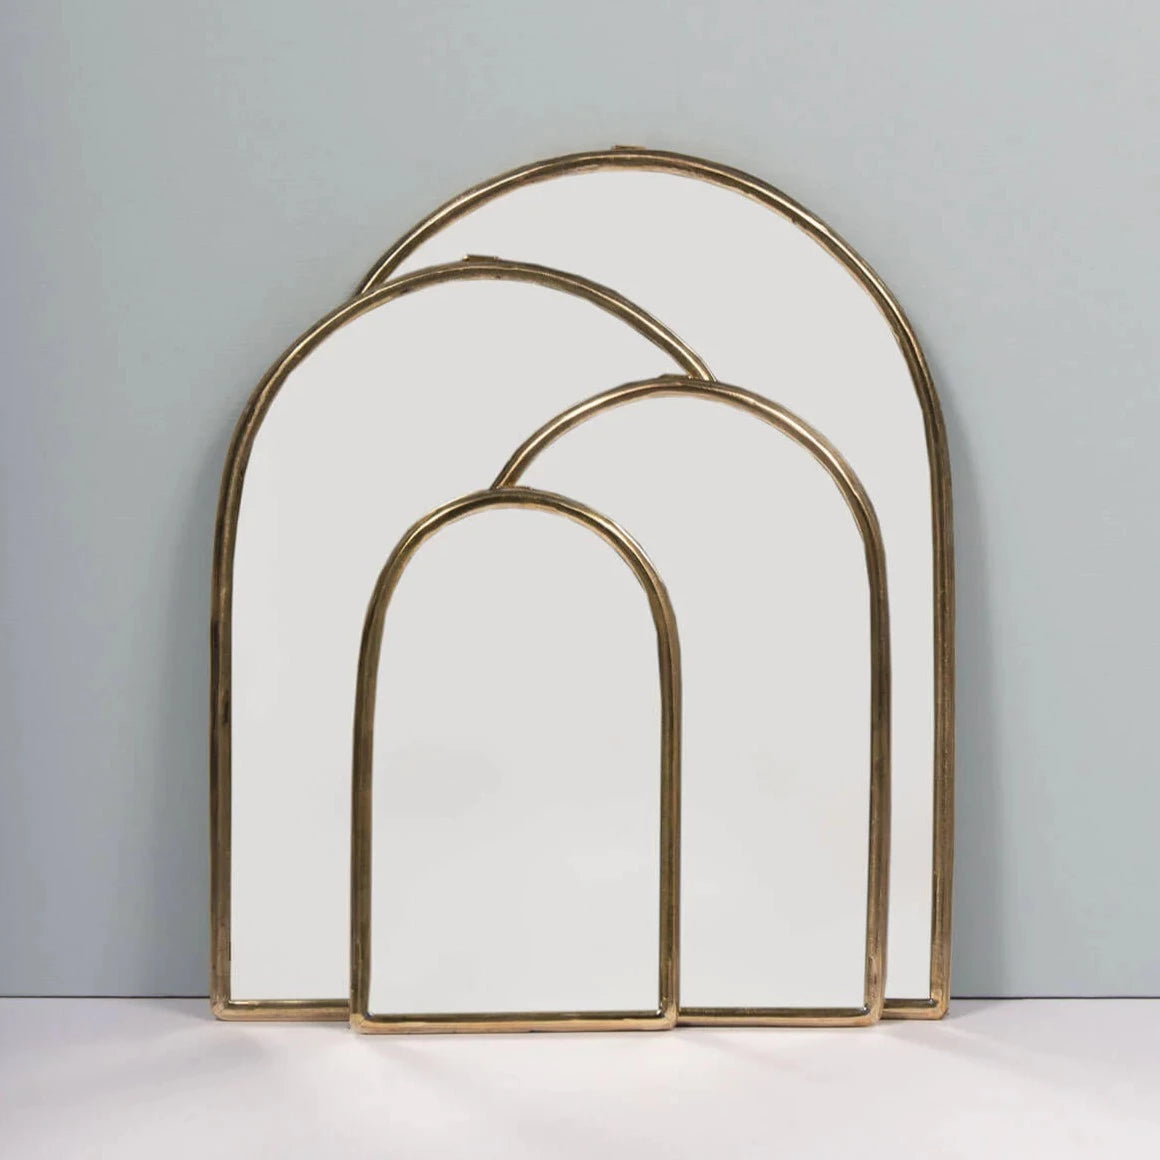 Moroccan Mirrors, Set of 4 arches